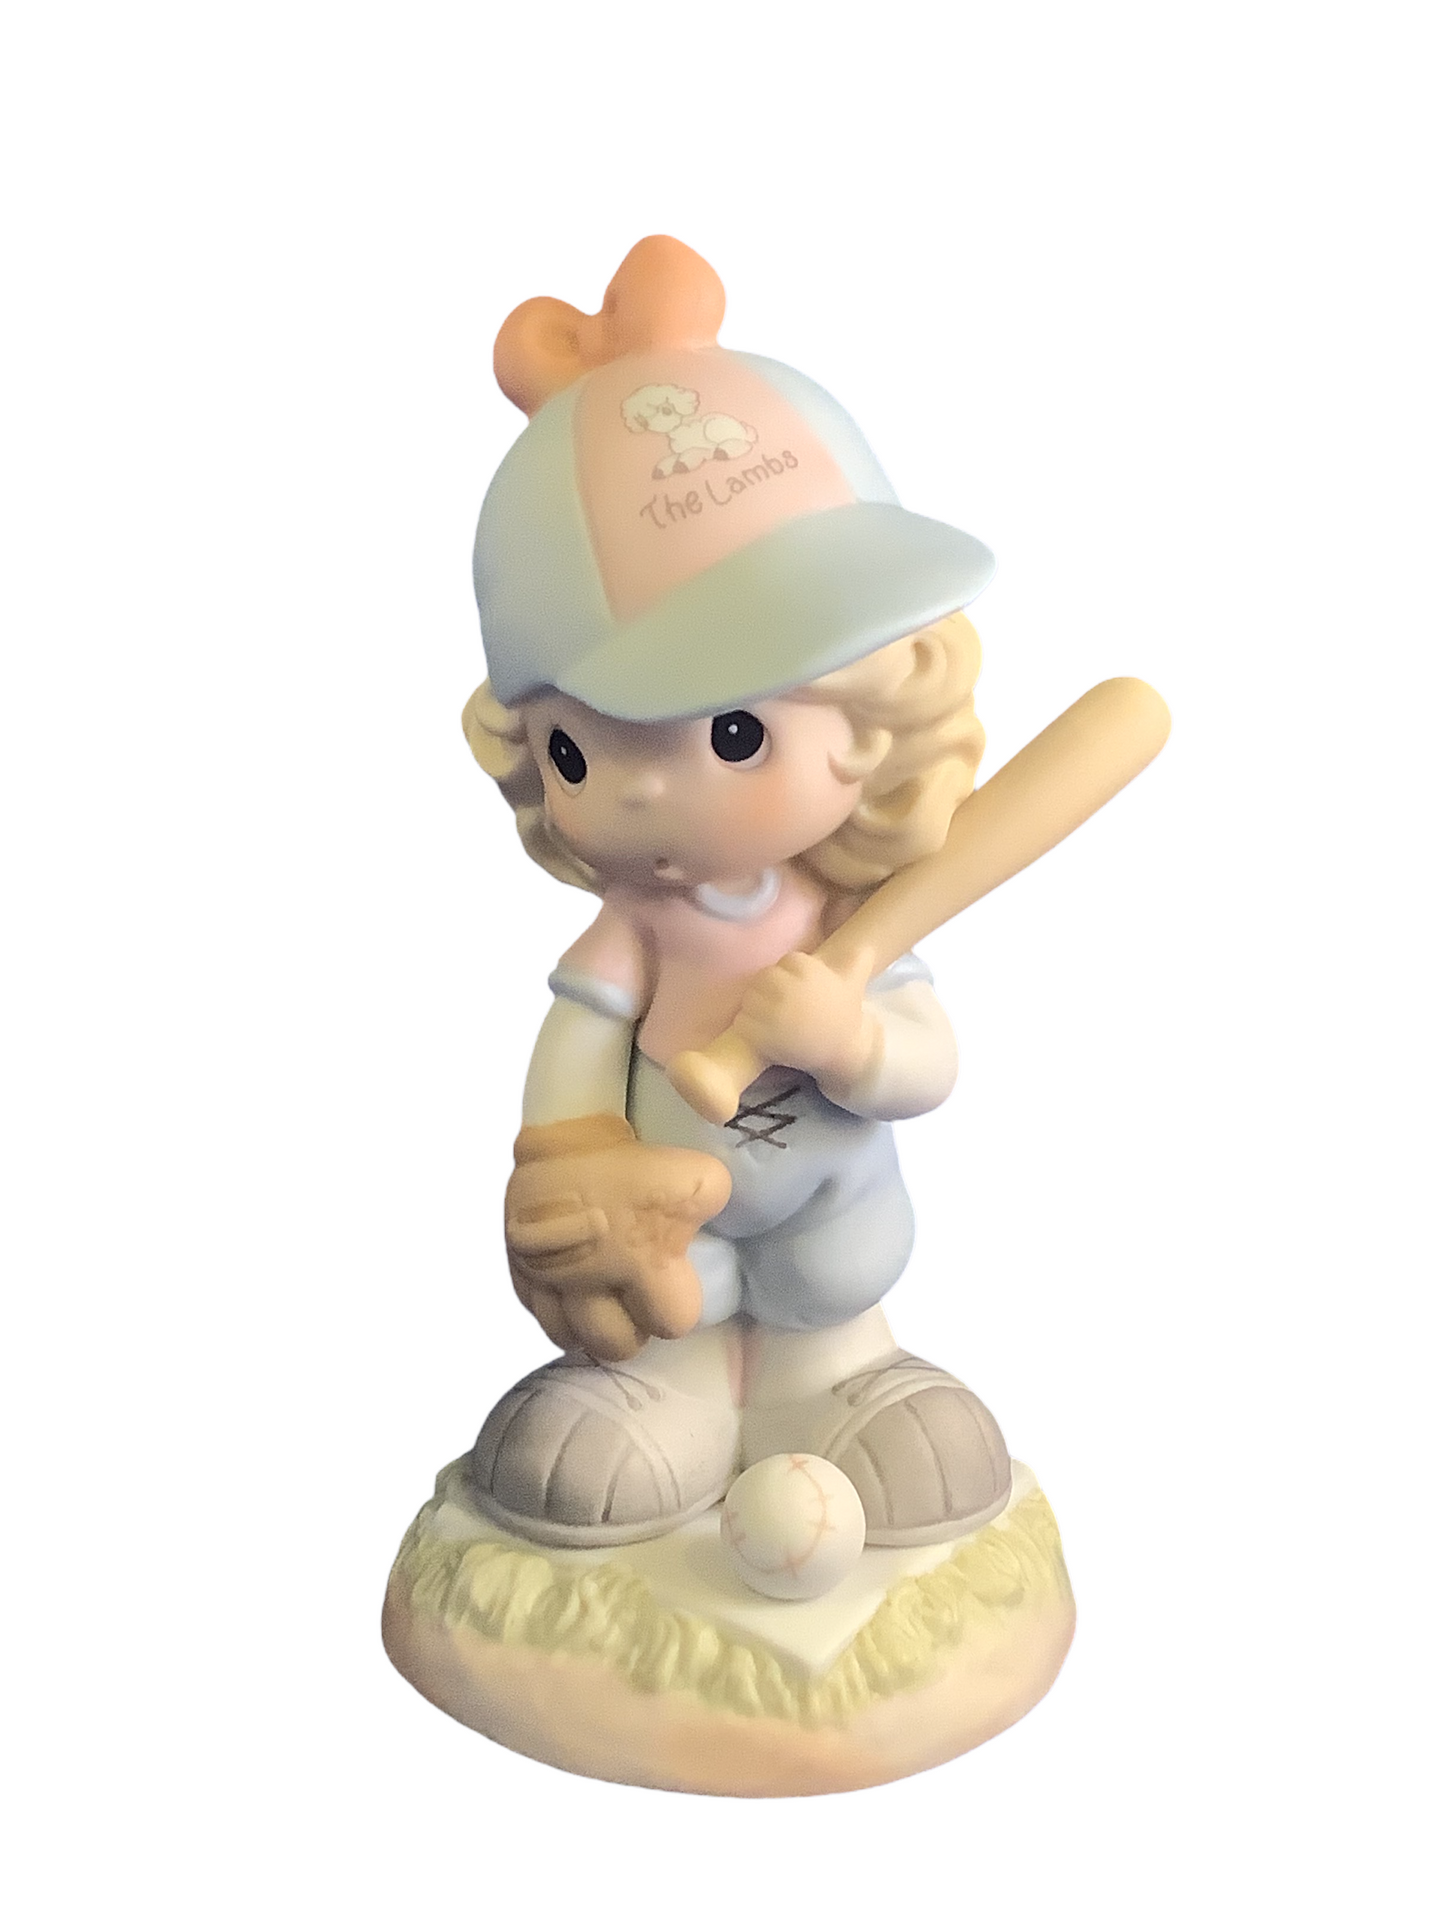 Let's Have A Ball Together - Precious Moment Figurine